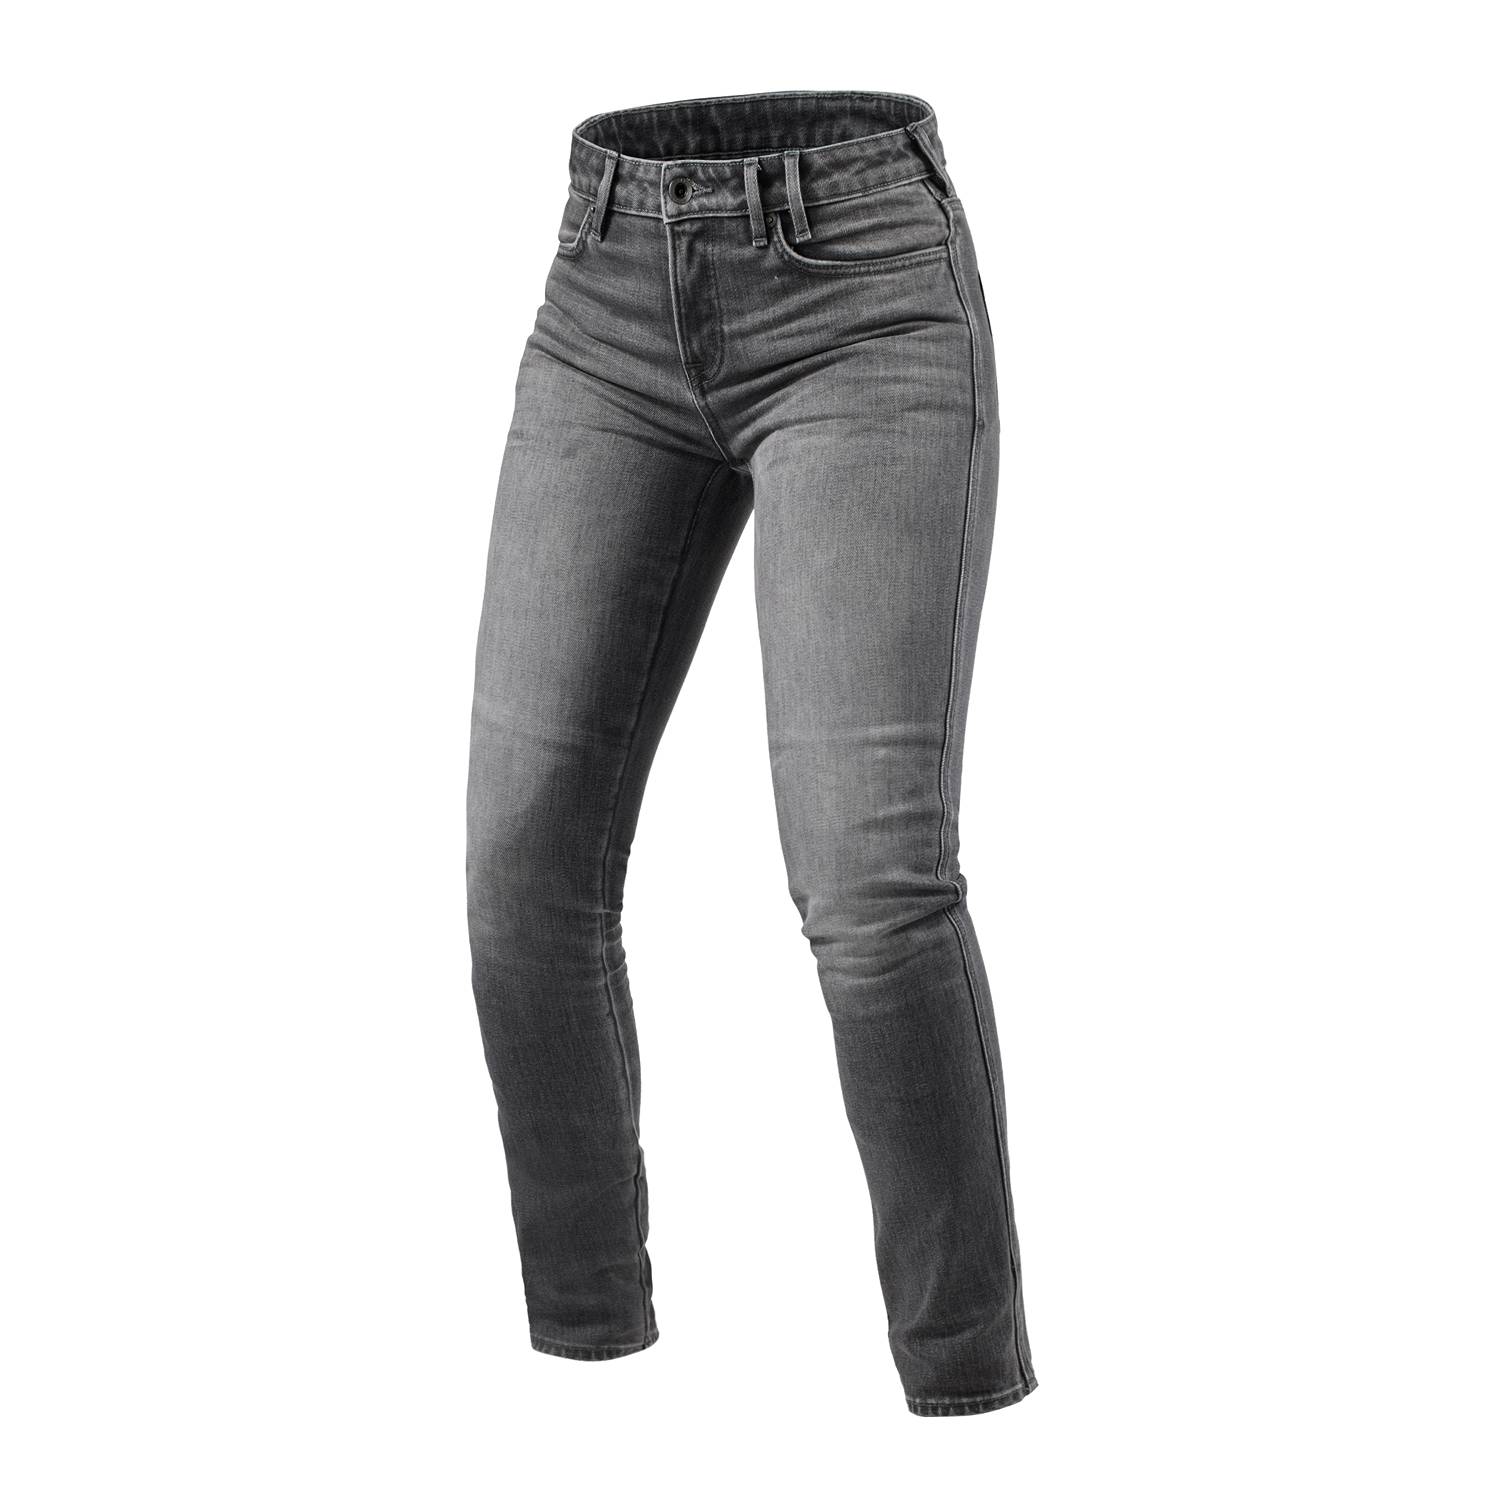 Image of EU REV'IT! Jeans Shelby 2 Ladies SK Medium Grey Stone L30 Taille L30/W30